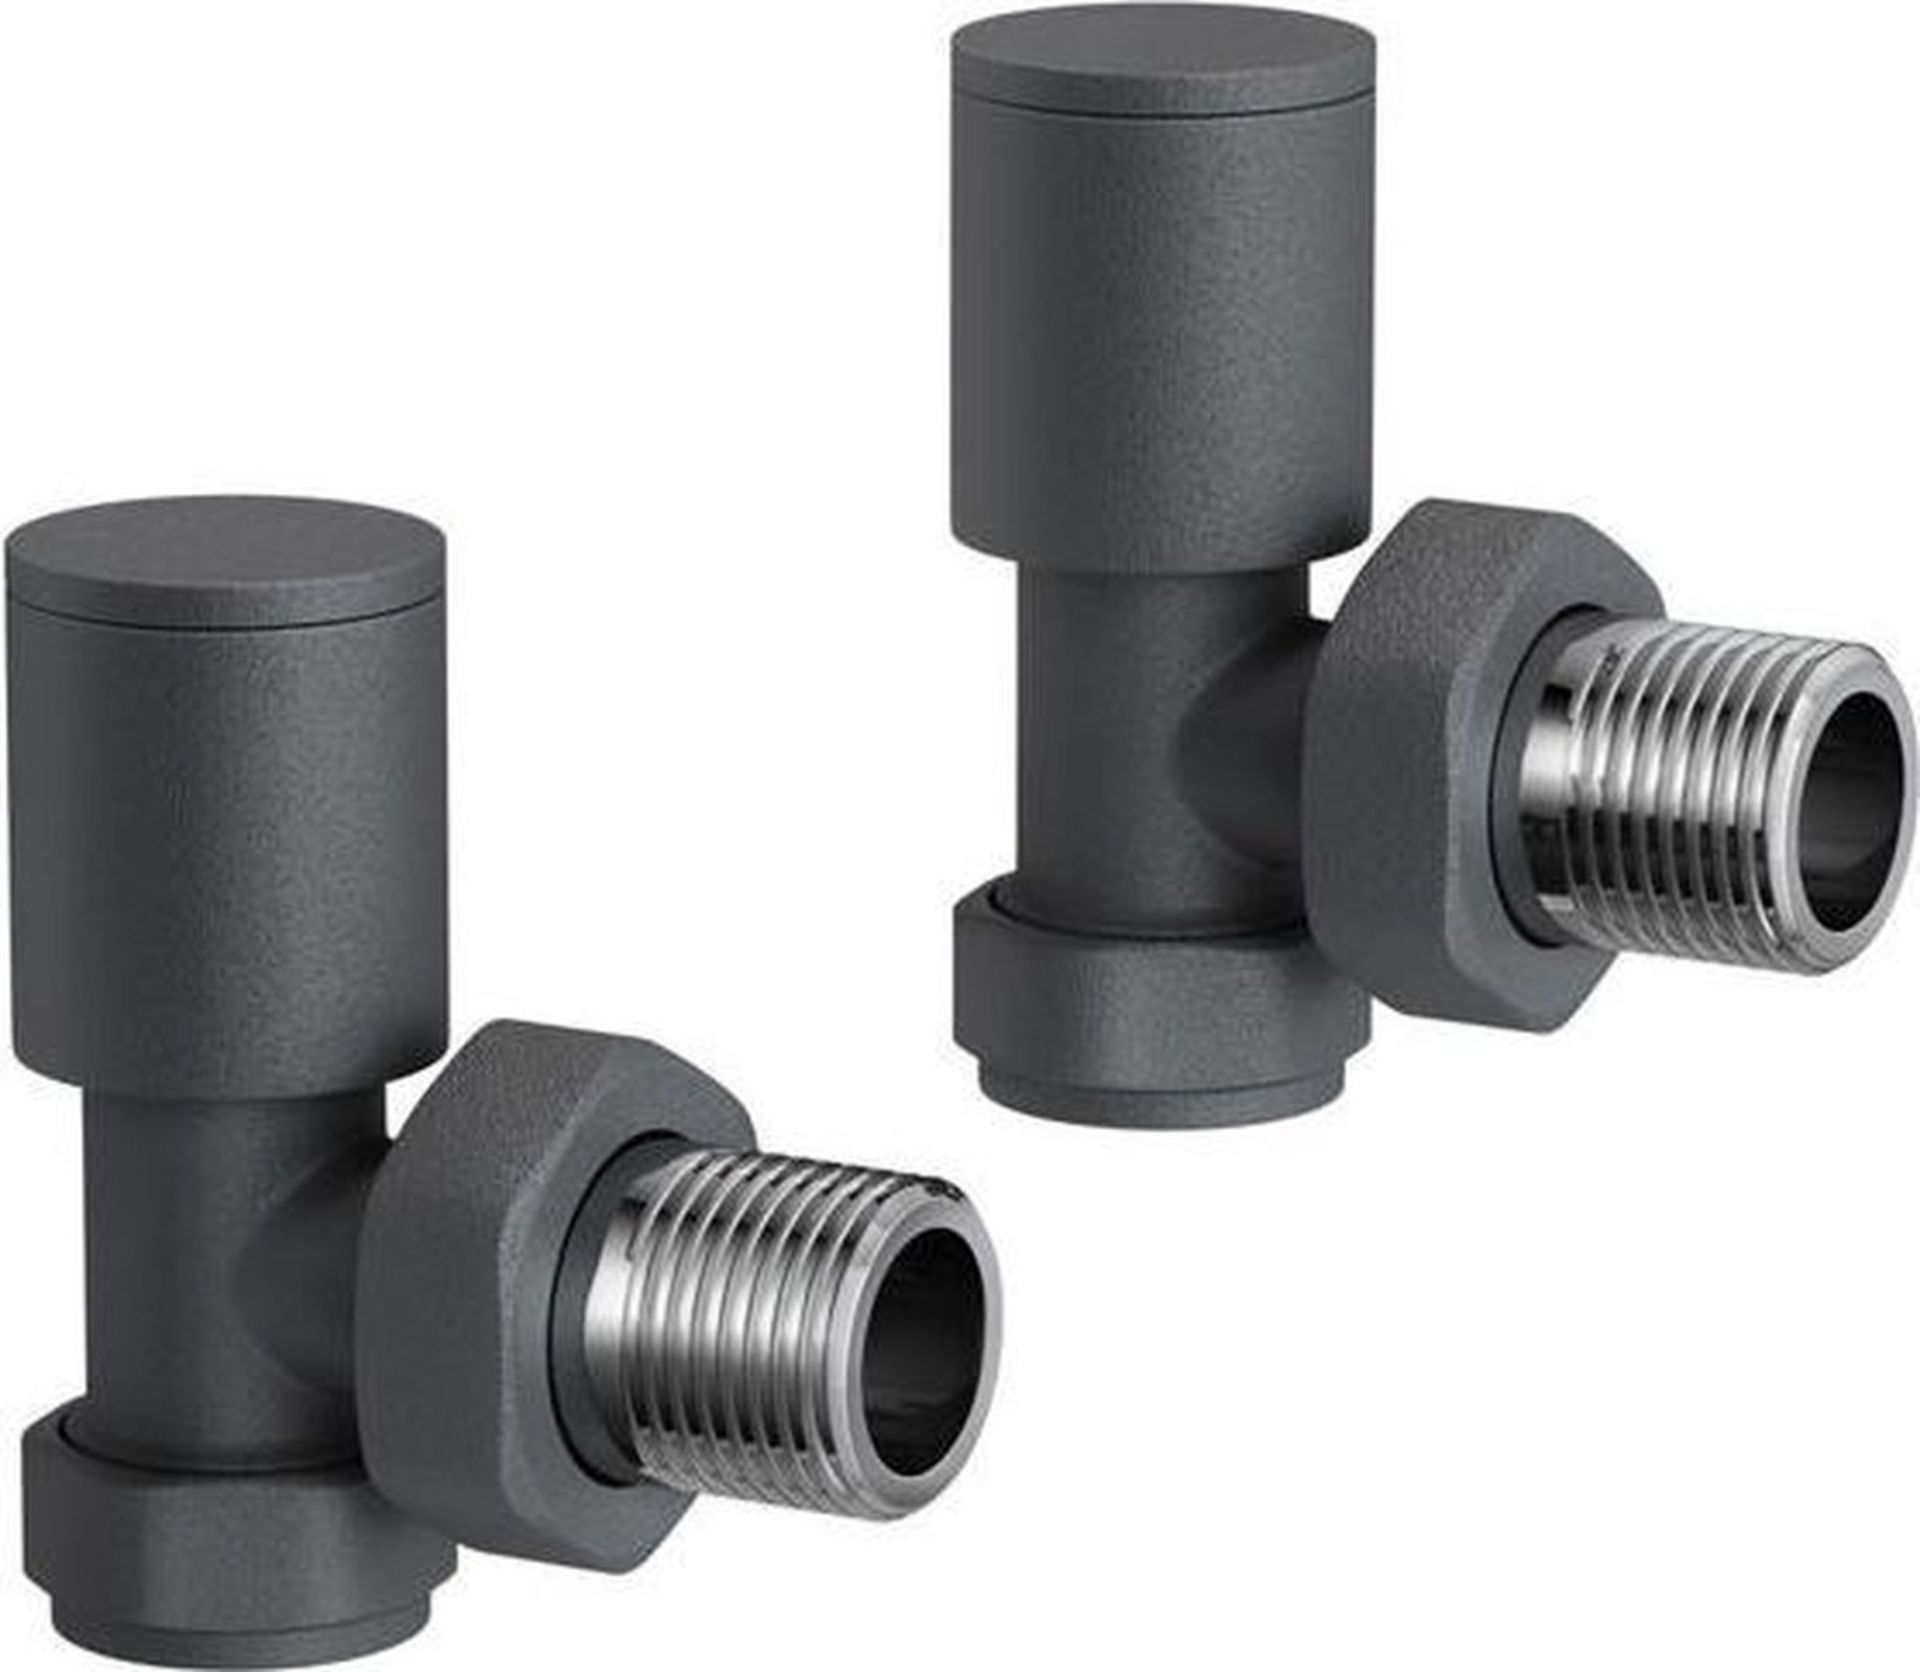 15mm Standard Connection Square Angled Anthracite Radiator Valves.Ra03A. Complies With BS2767 ...